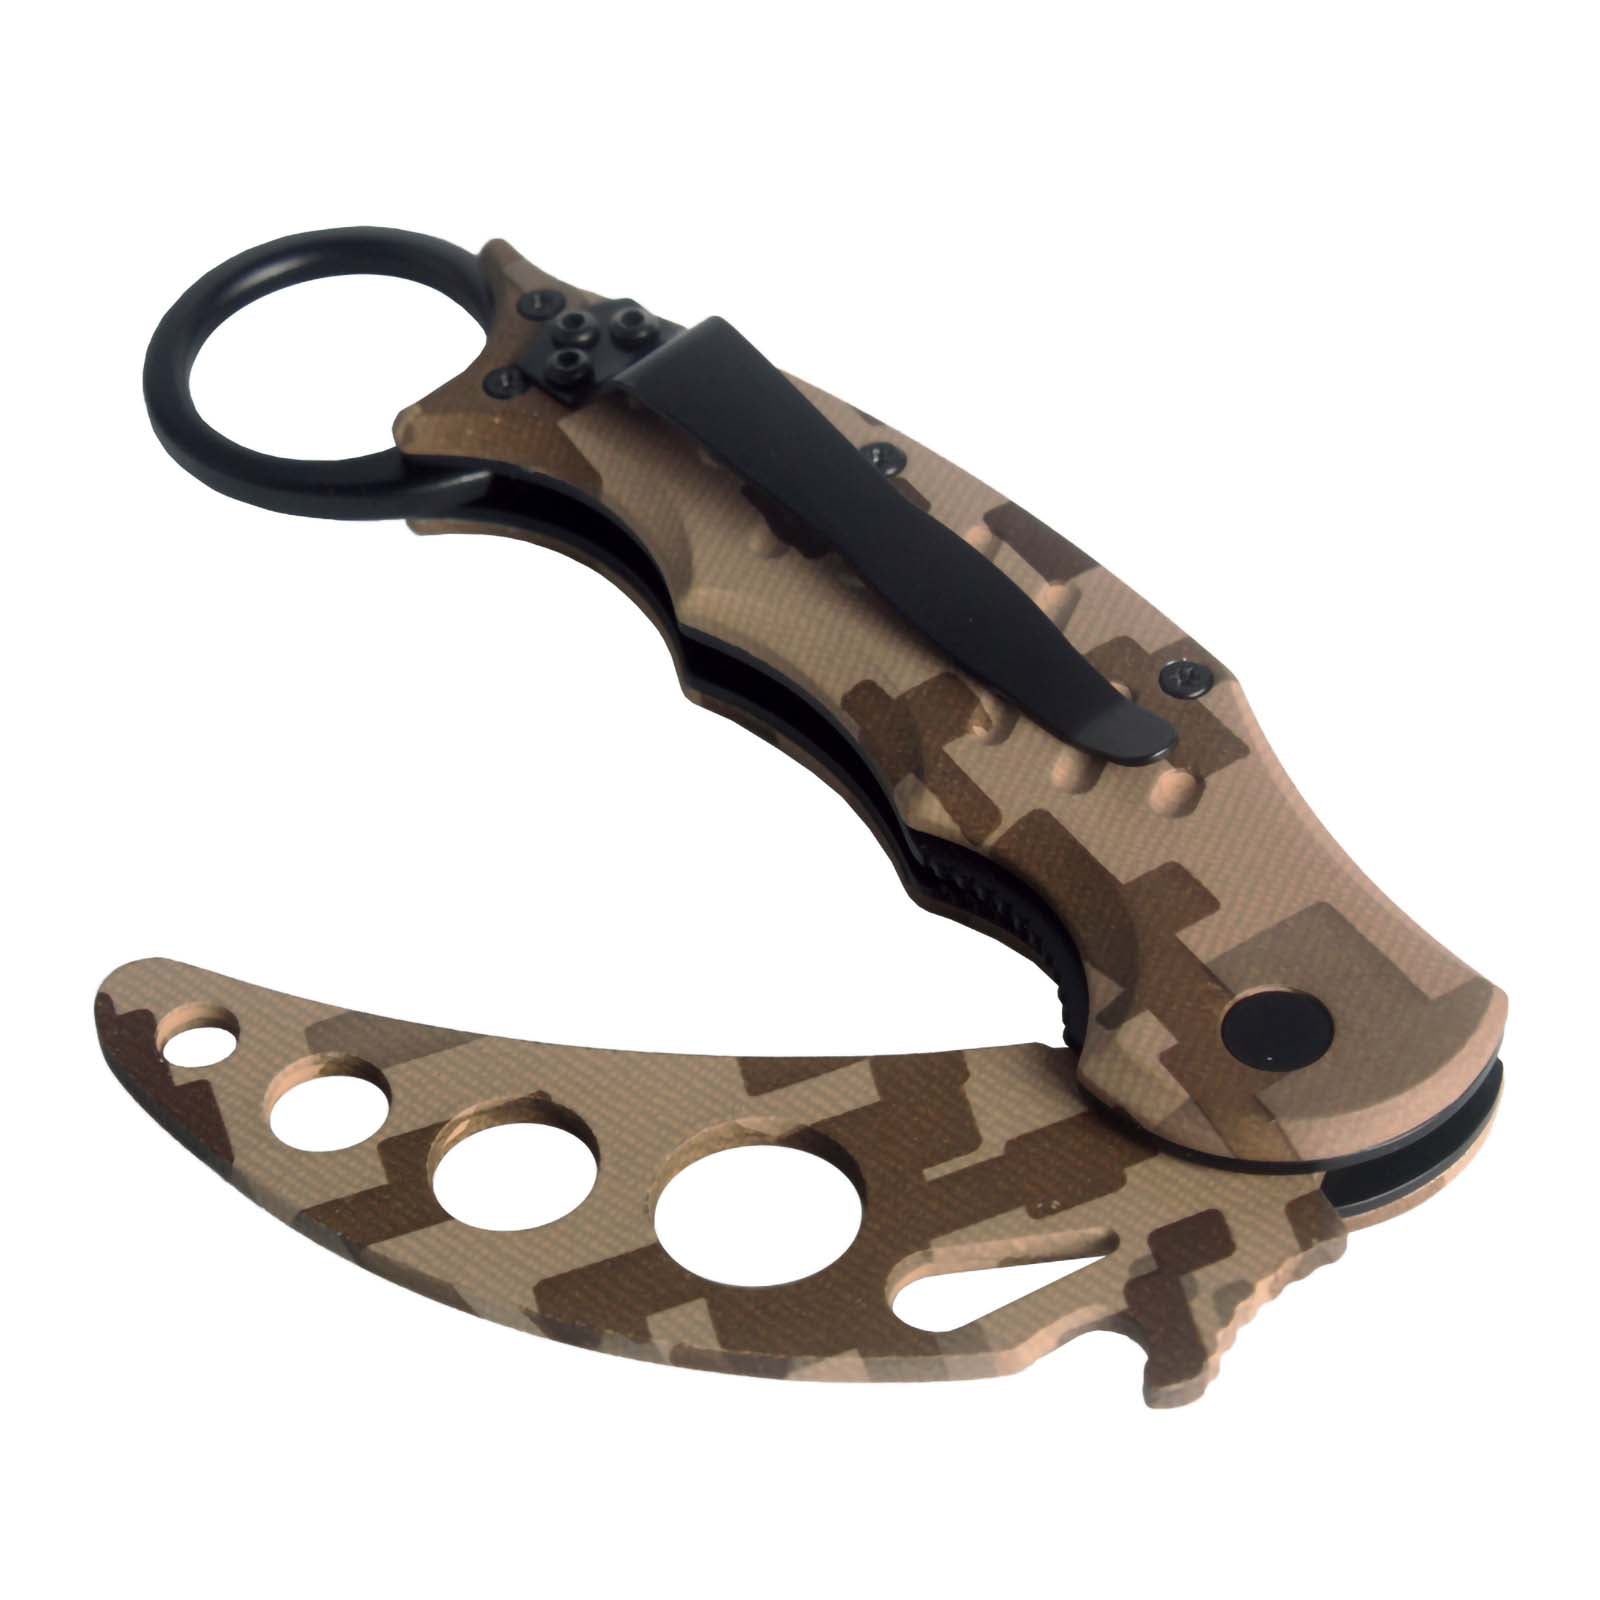 Andux-Karambit-Dull-Knife-with-Pocket-Clip-CS/WD01-Camouflage